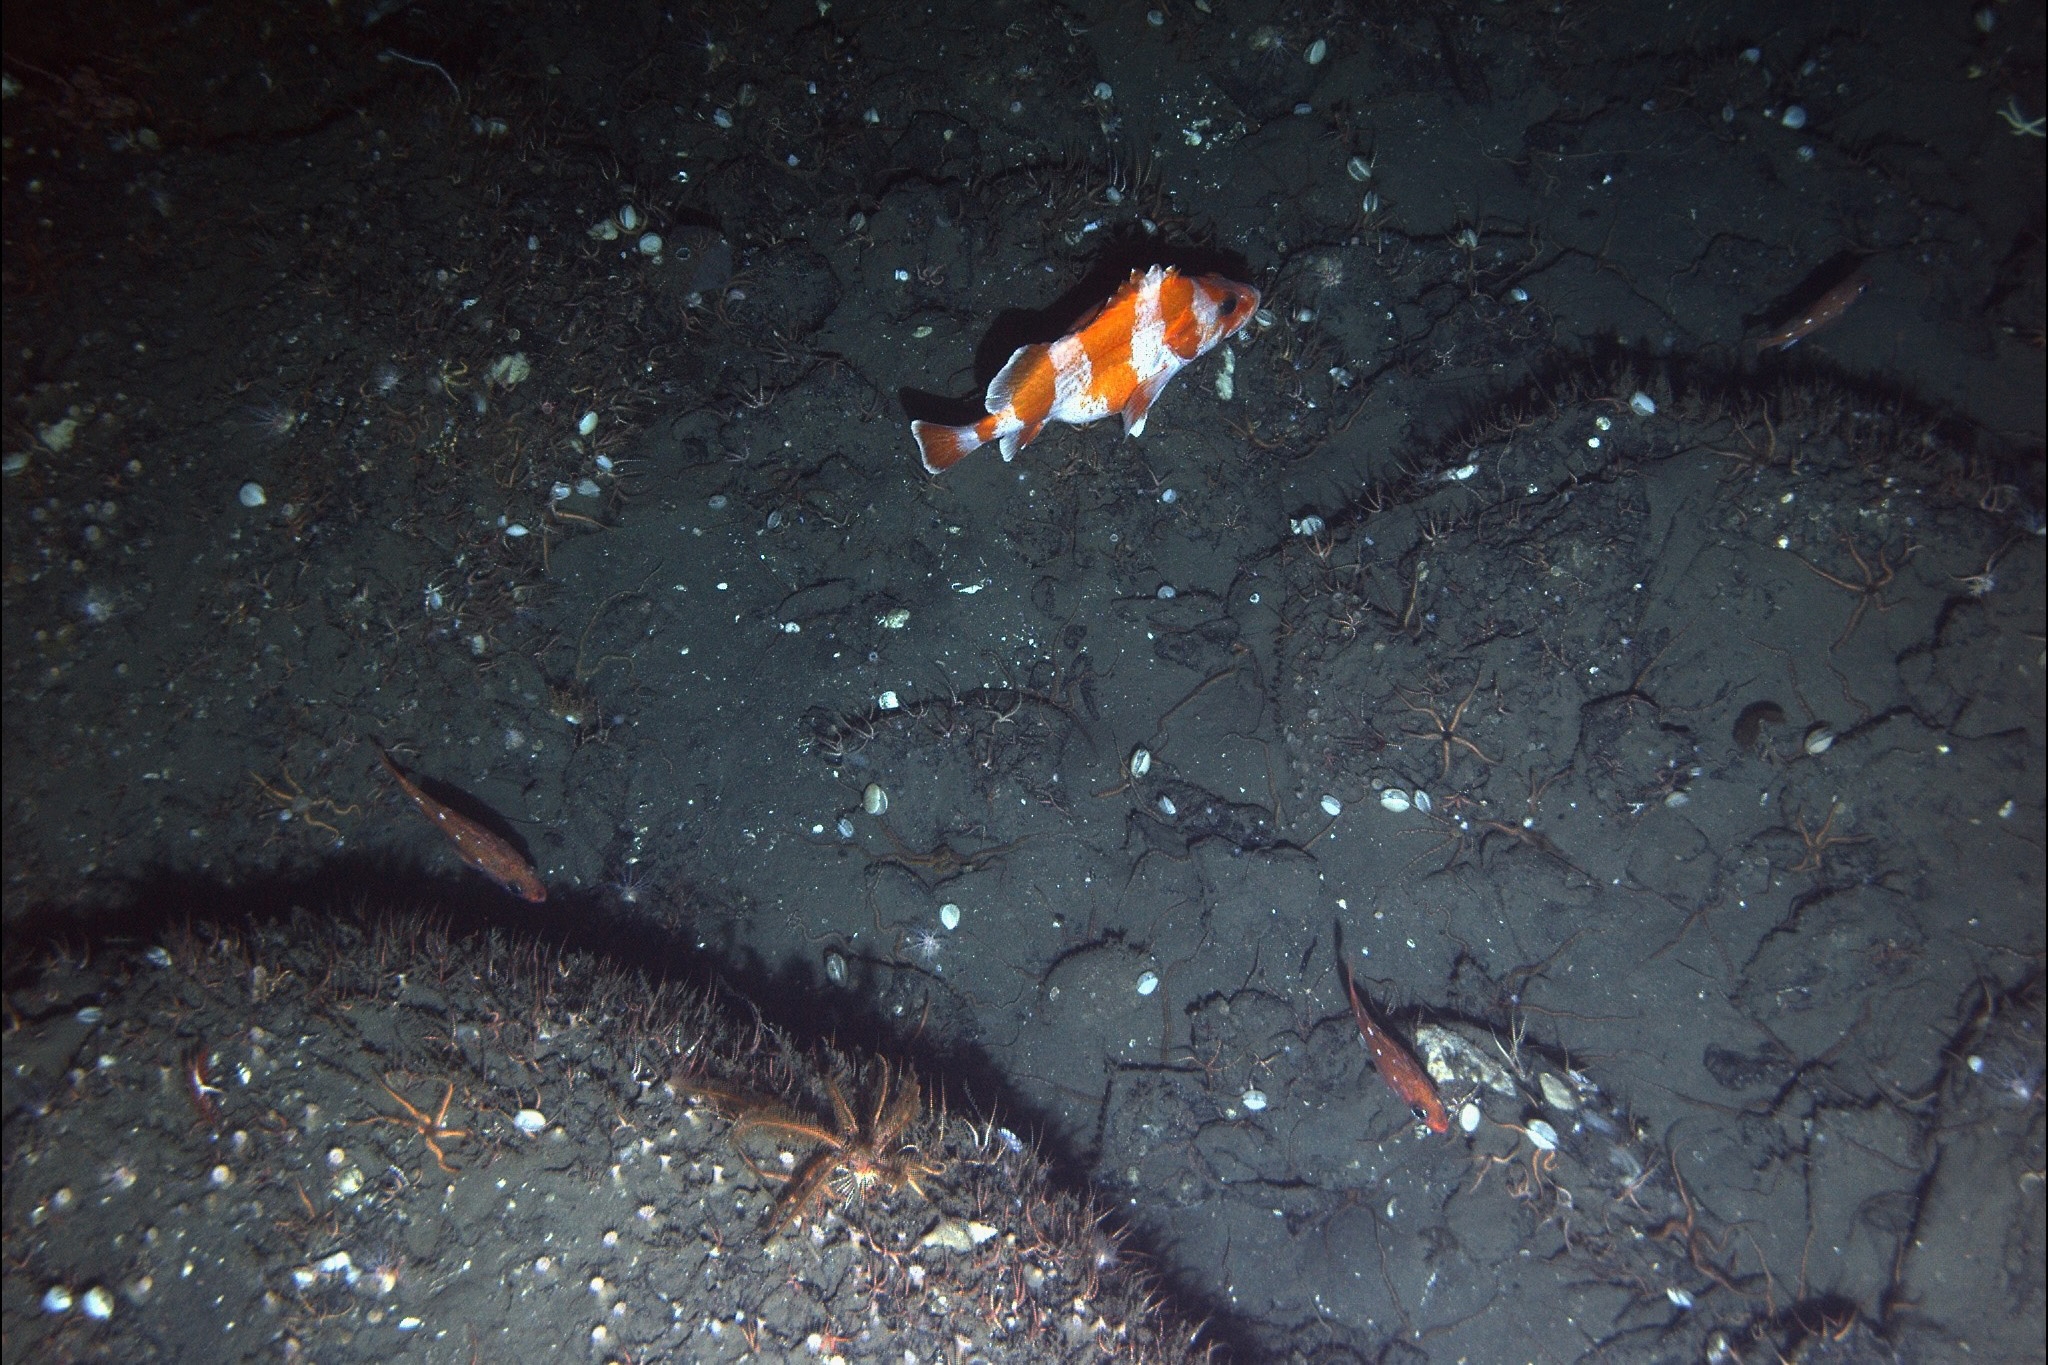 Flag rockfish and three swordspine rockfish swim among a basket star and numerous brittle stars on the side of one of the asphalt volcanoes